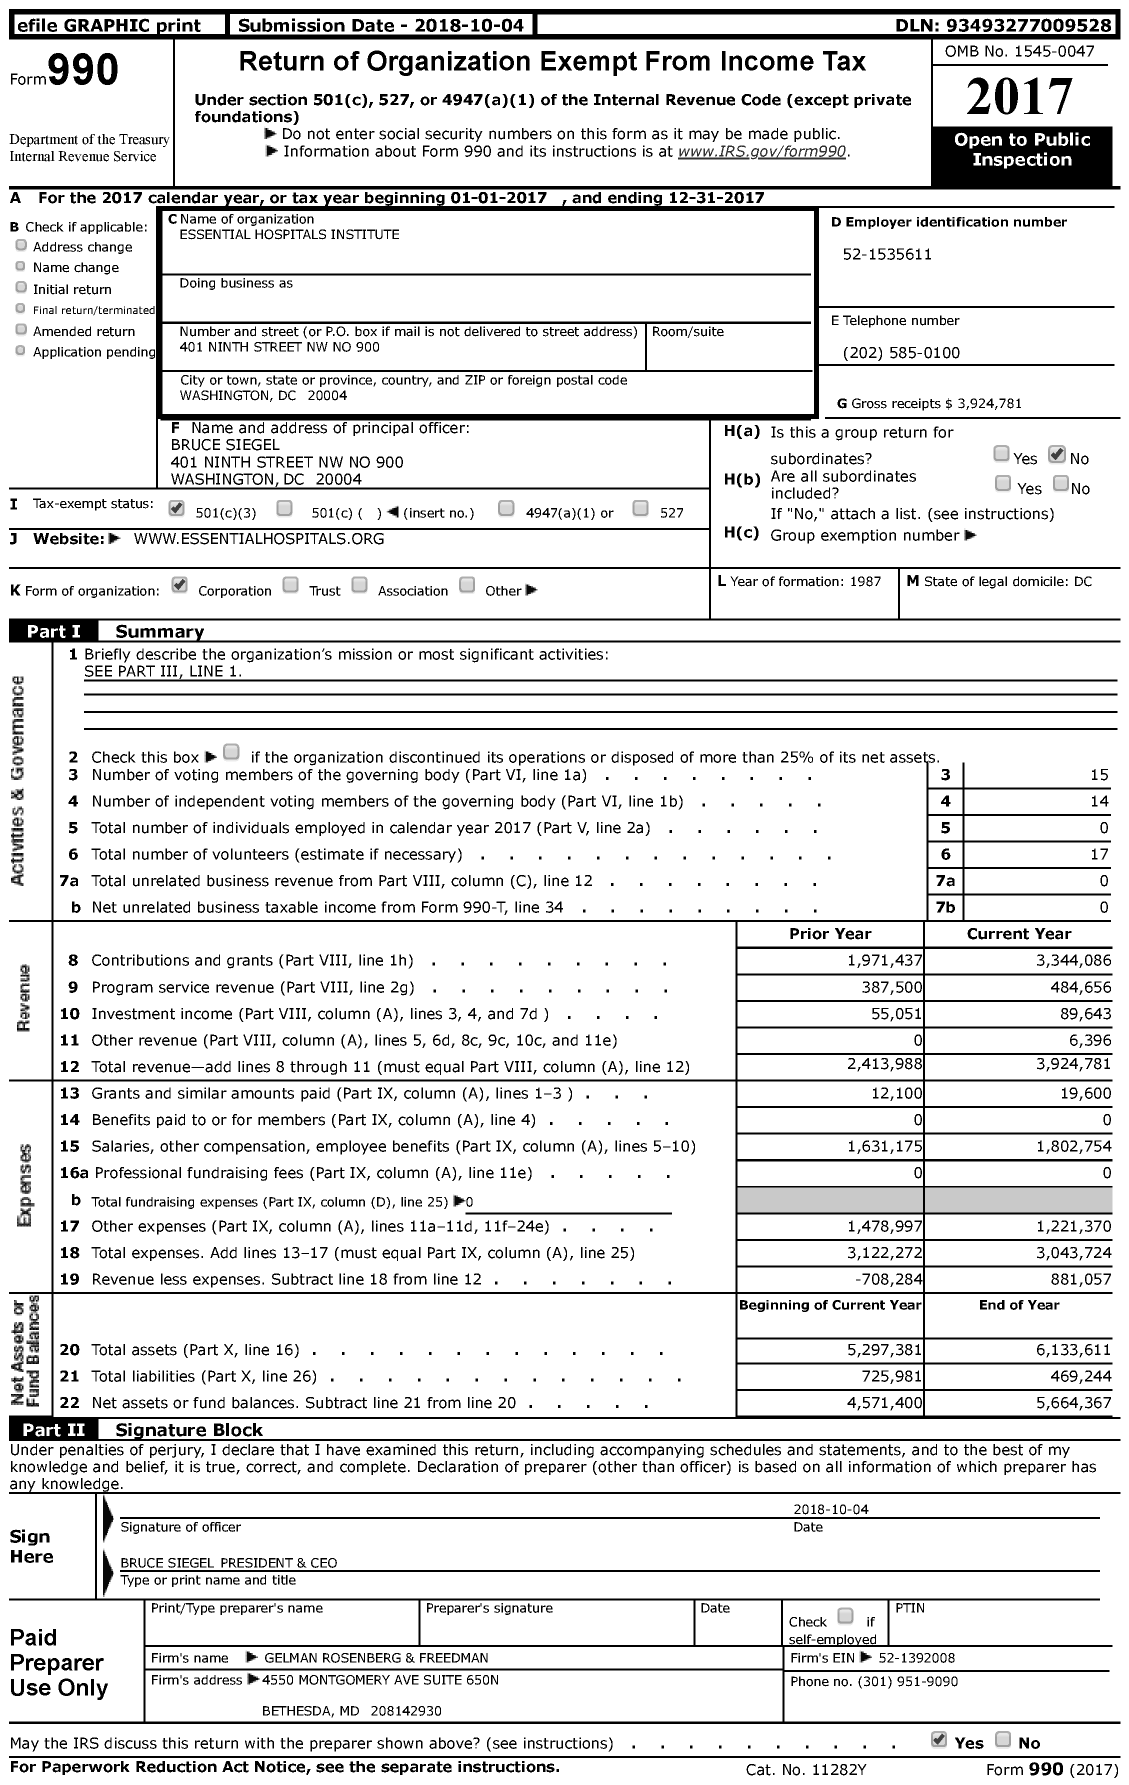 Image of first page of 2017 Form 990 for Essential Hospitals Institute